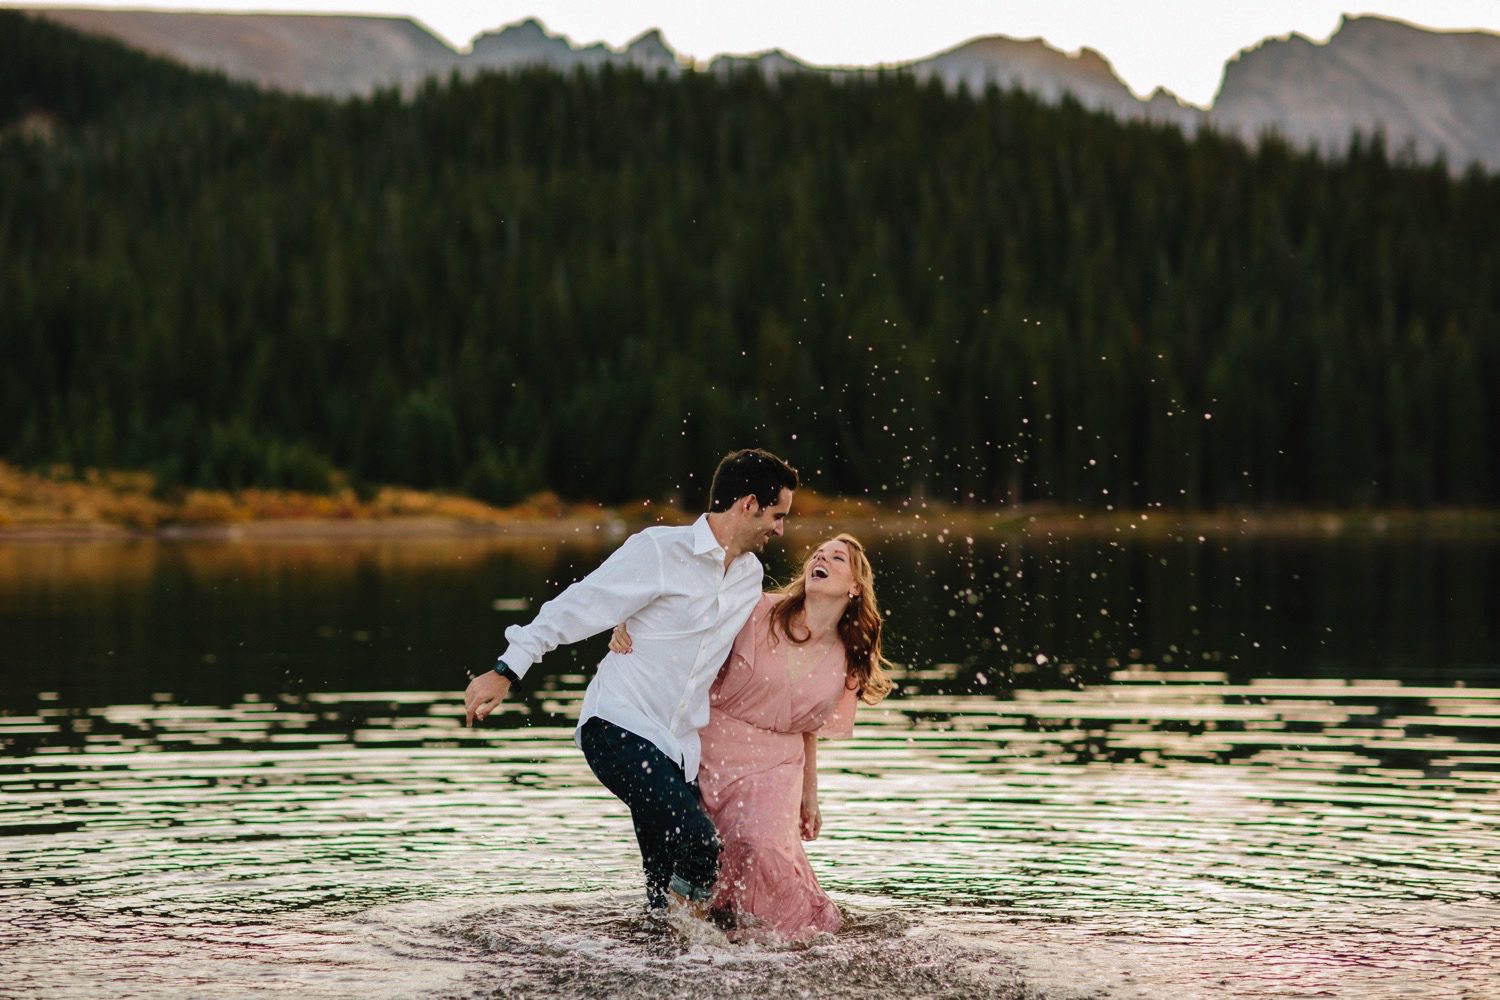 Roosevelt National Forest Engagement Photos, Brainard Lake Engagement Photos, Colorado Engagement Photographer, Colorado Mountain engagement photos, Colorado wedding photographer, Best photographers in Colorado, Best Colorado engagement photographers, Best Colorado Wedding photographers, Fun Engagement photo ideas, Engagement photos in water, Mountain Engagement session, Save the date photo ideas, Boulder Colorado Engagement photos, Rocky Mountain National Park Engagement Photos